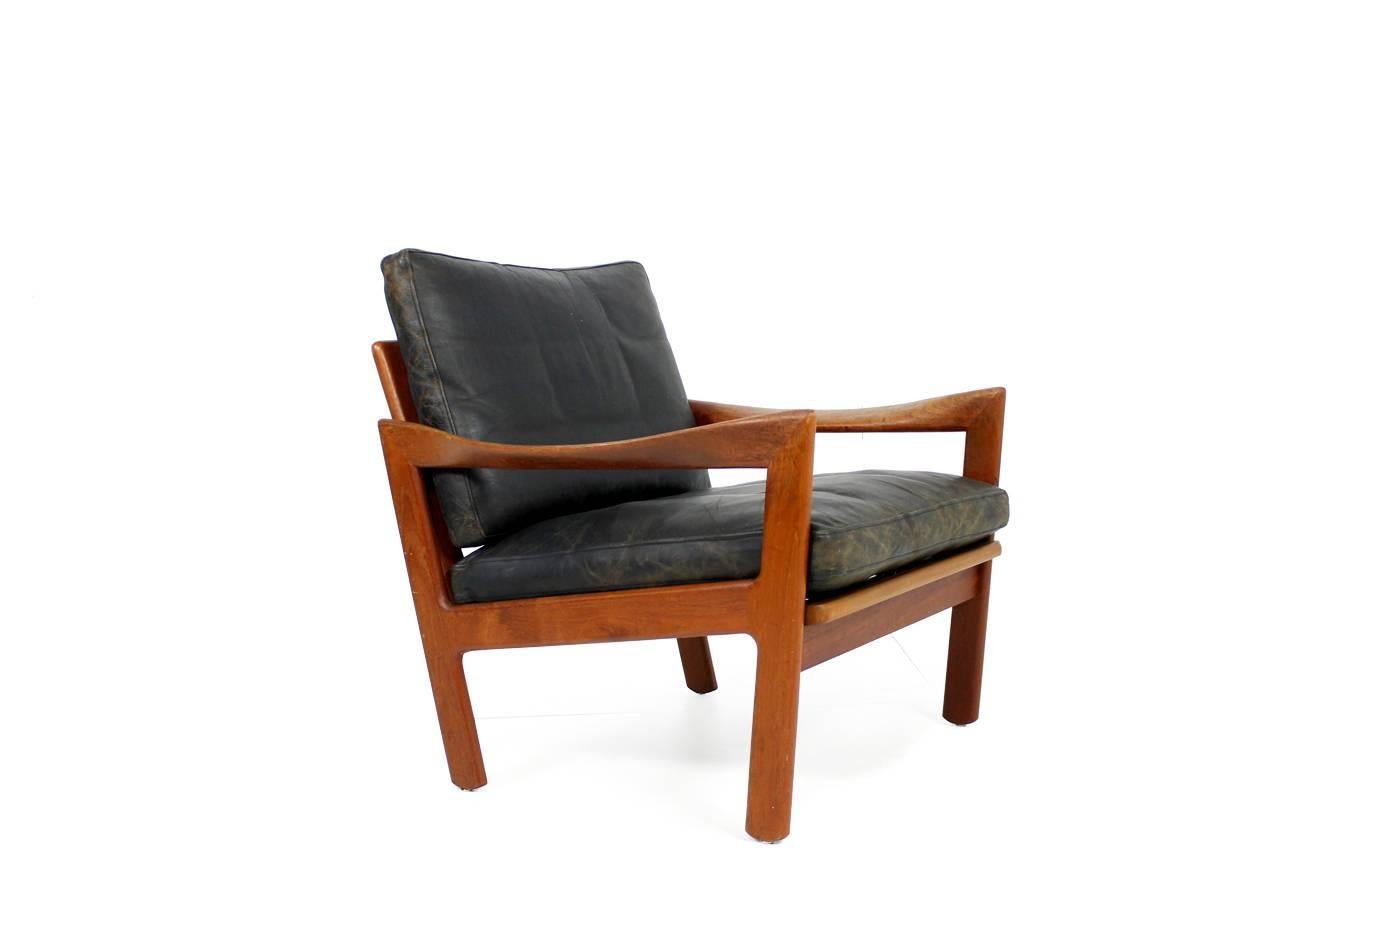 A beautiful danish modern Teak Easy Chair by Illum Wikkelso for Niels Eilersen, Denmark ca. 1960. An asymmetrical teak base, original leather cushions with down filling and beautiful patina, no holes no cracks only an unique patina on the real